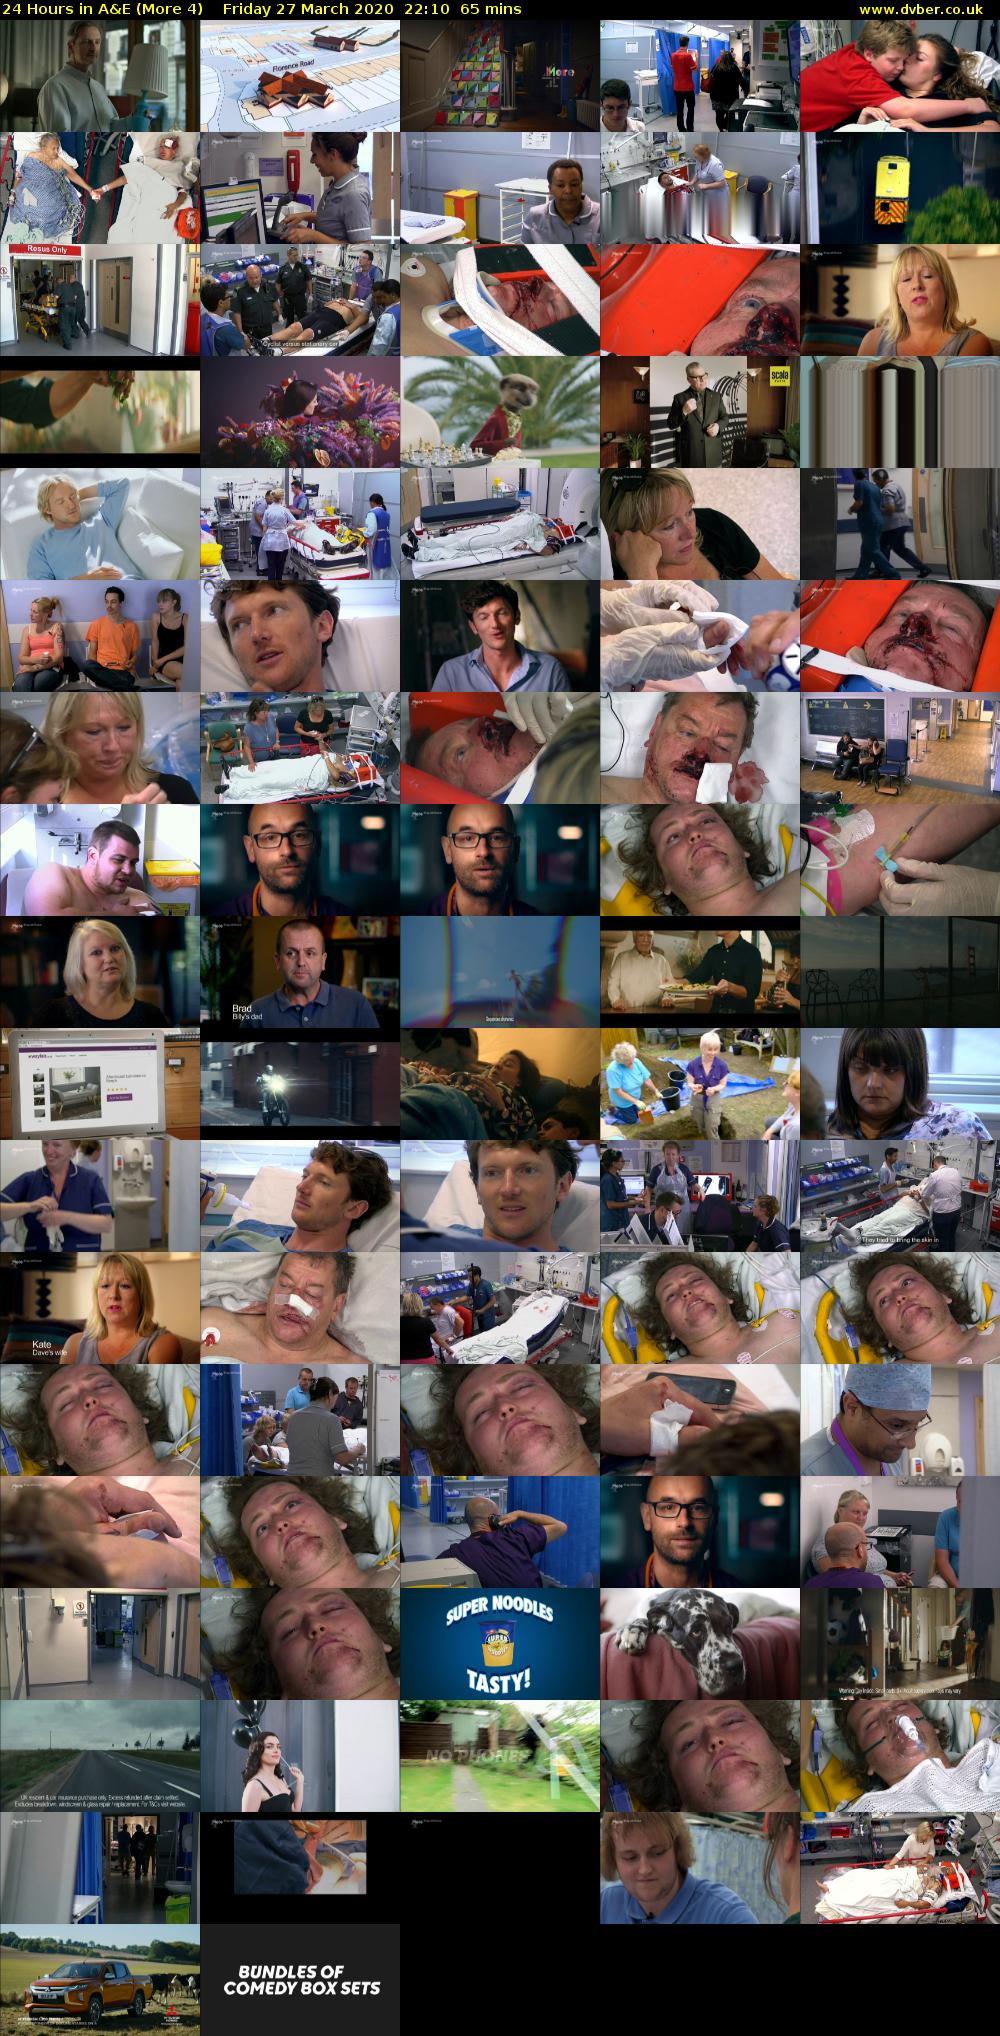 24 Hours in A&E (More 4) Friday 27 March 2020 22:10 - 23:15